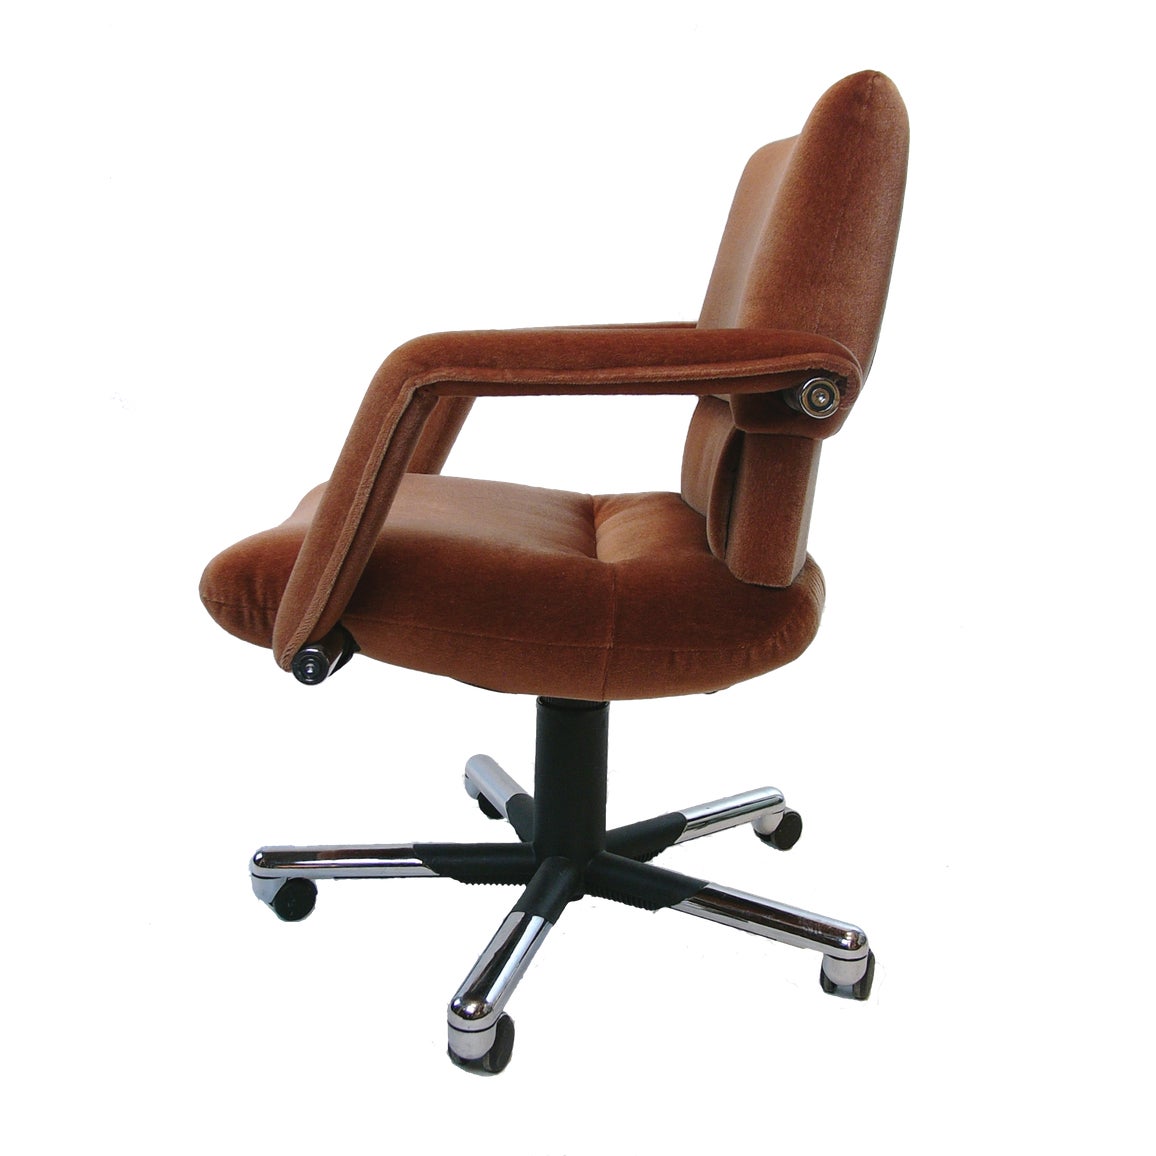 A luxurious Mario Bellini extra wide swivel and reclining executive chairs on casters. Made by Vitra. Most comfortable desk chair with mohair type upholstery that will work with many settings.